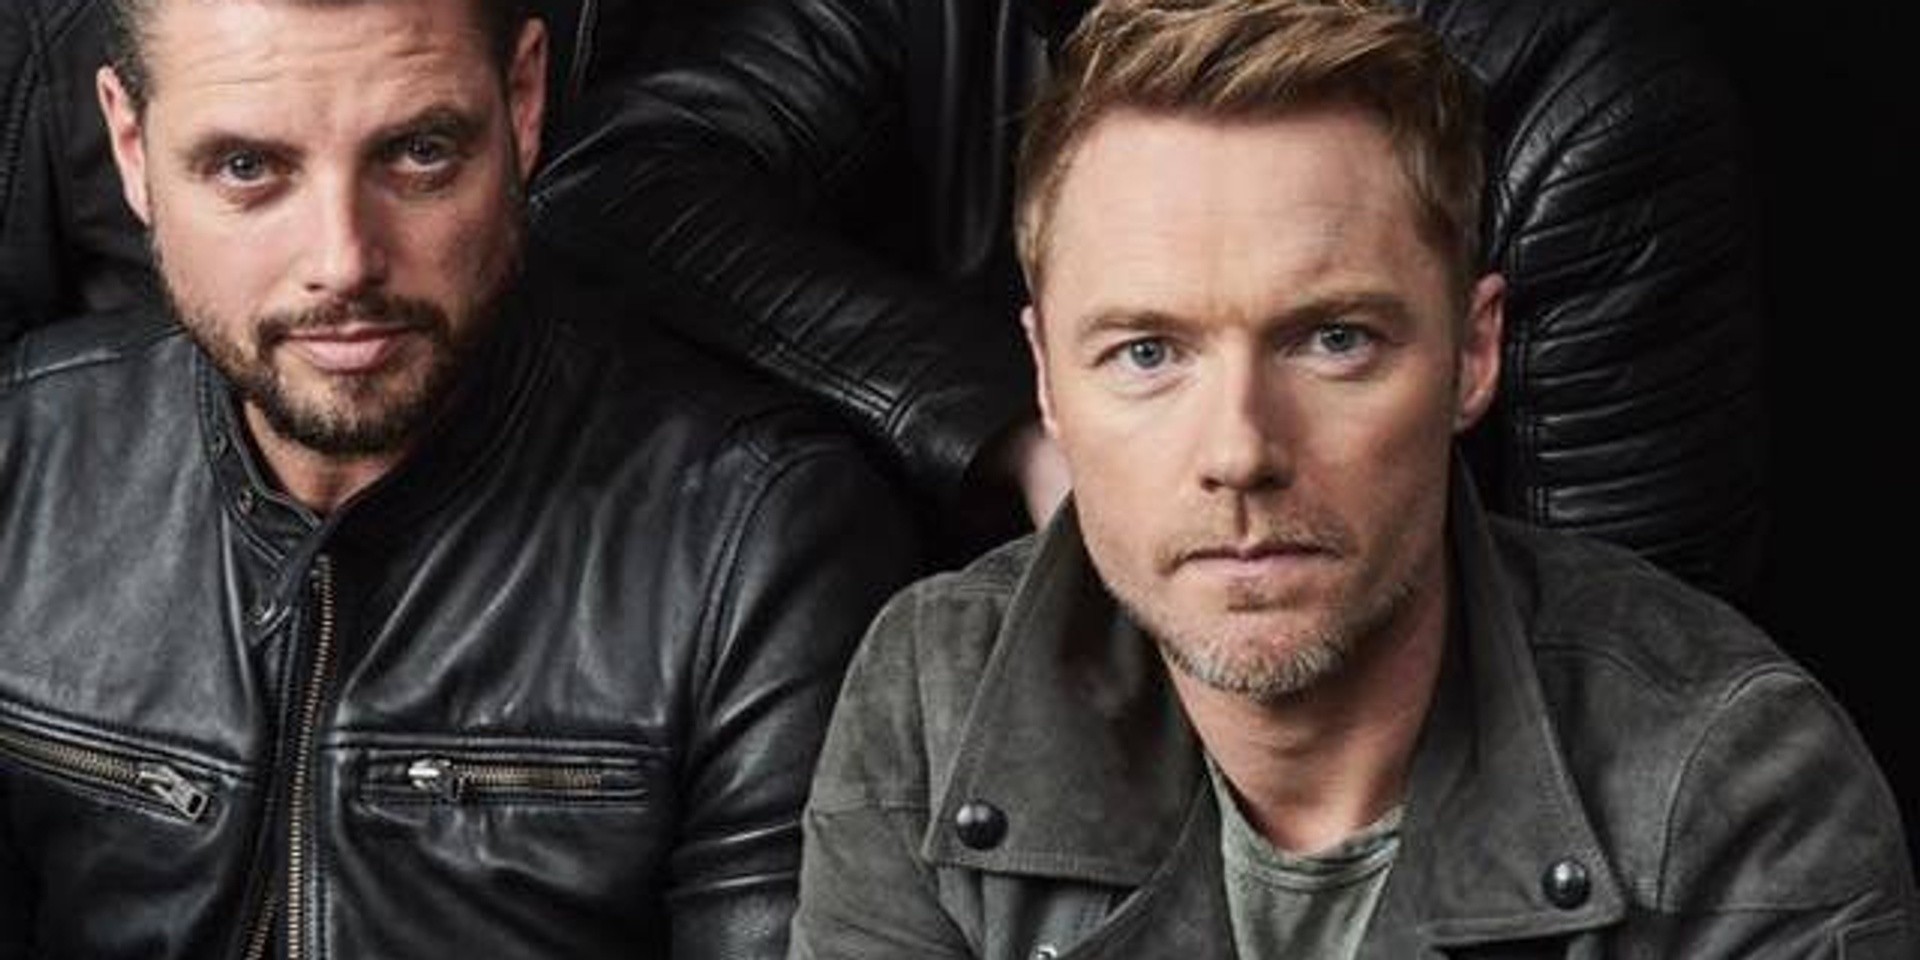 Boyzone to perform in Singapore to celebrate 25th anniversary